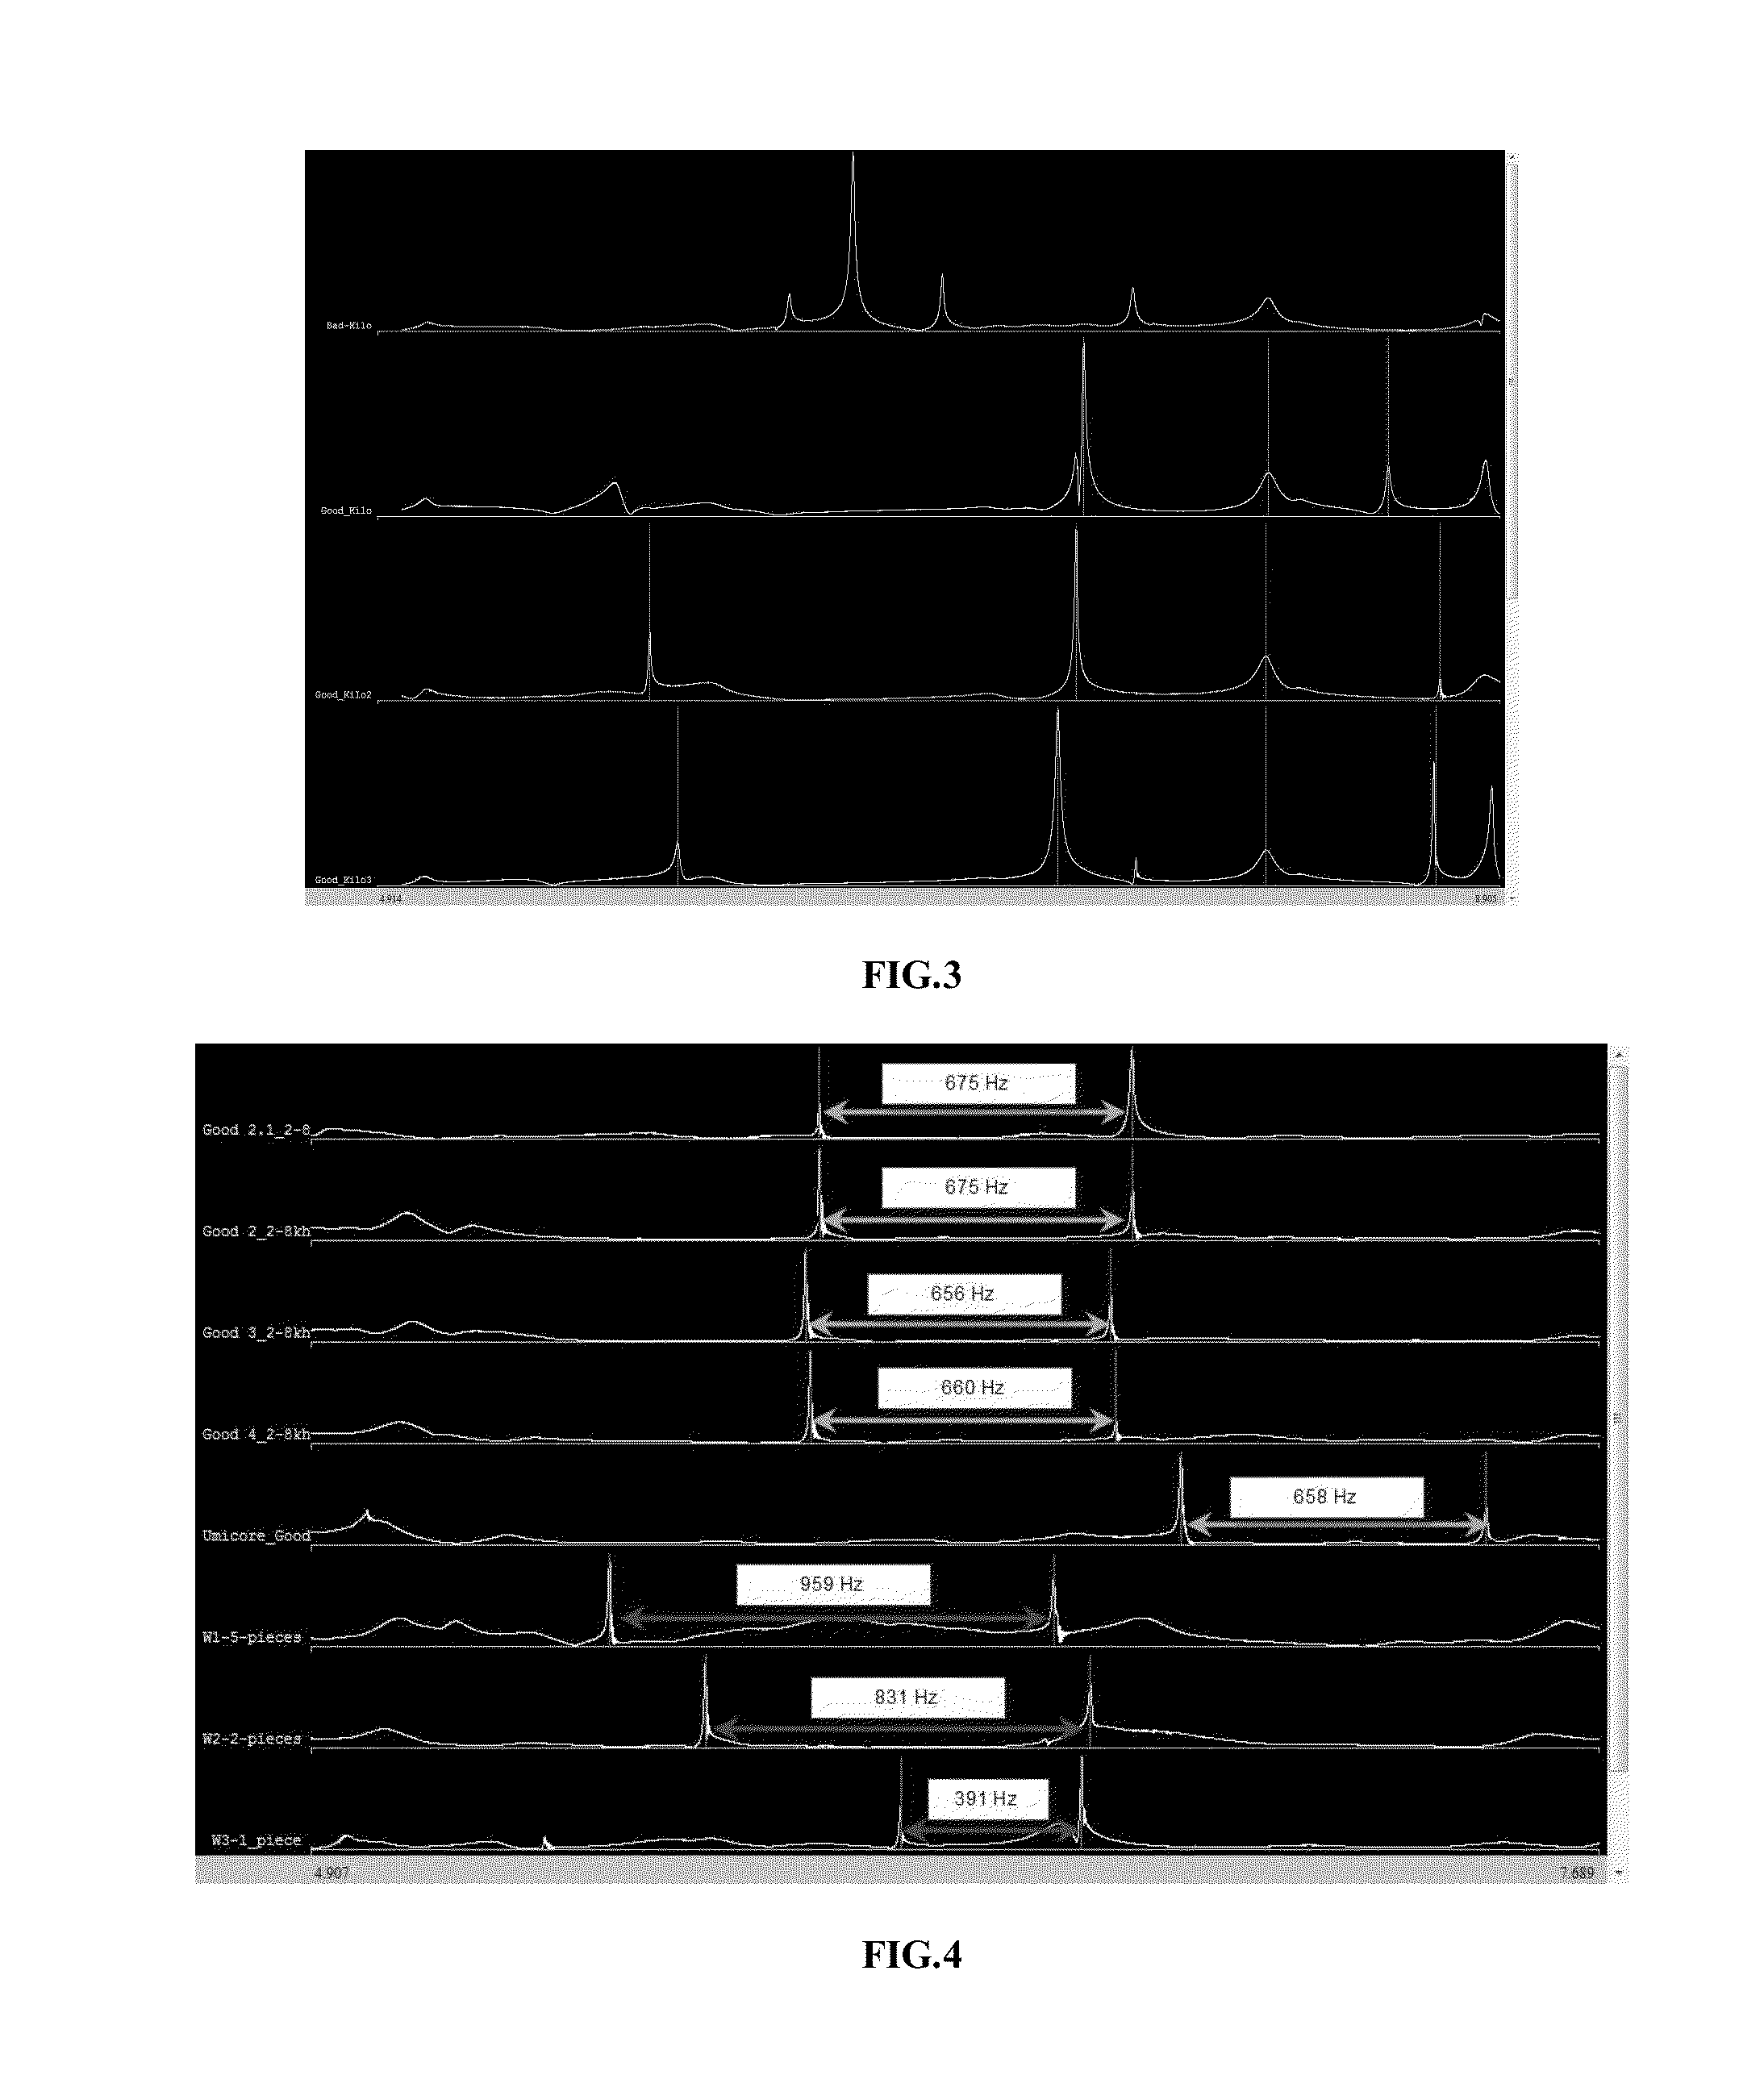 Method for detecting the purity of gold bullion